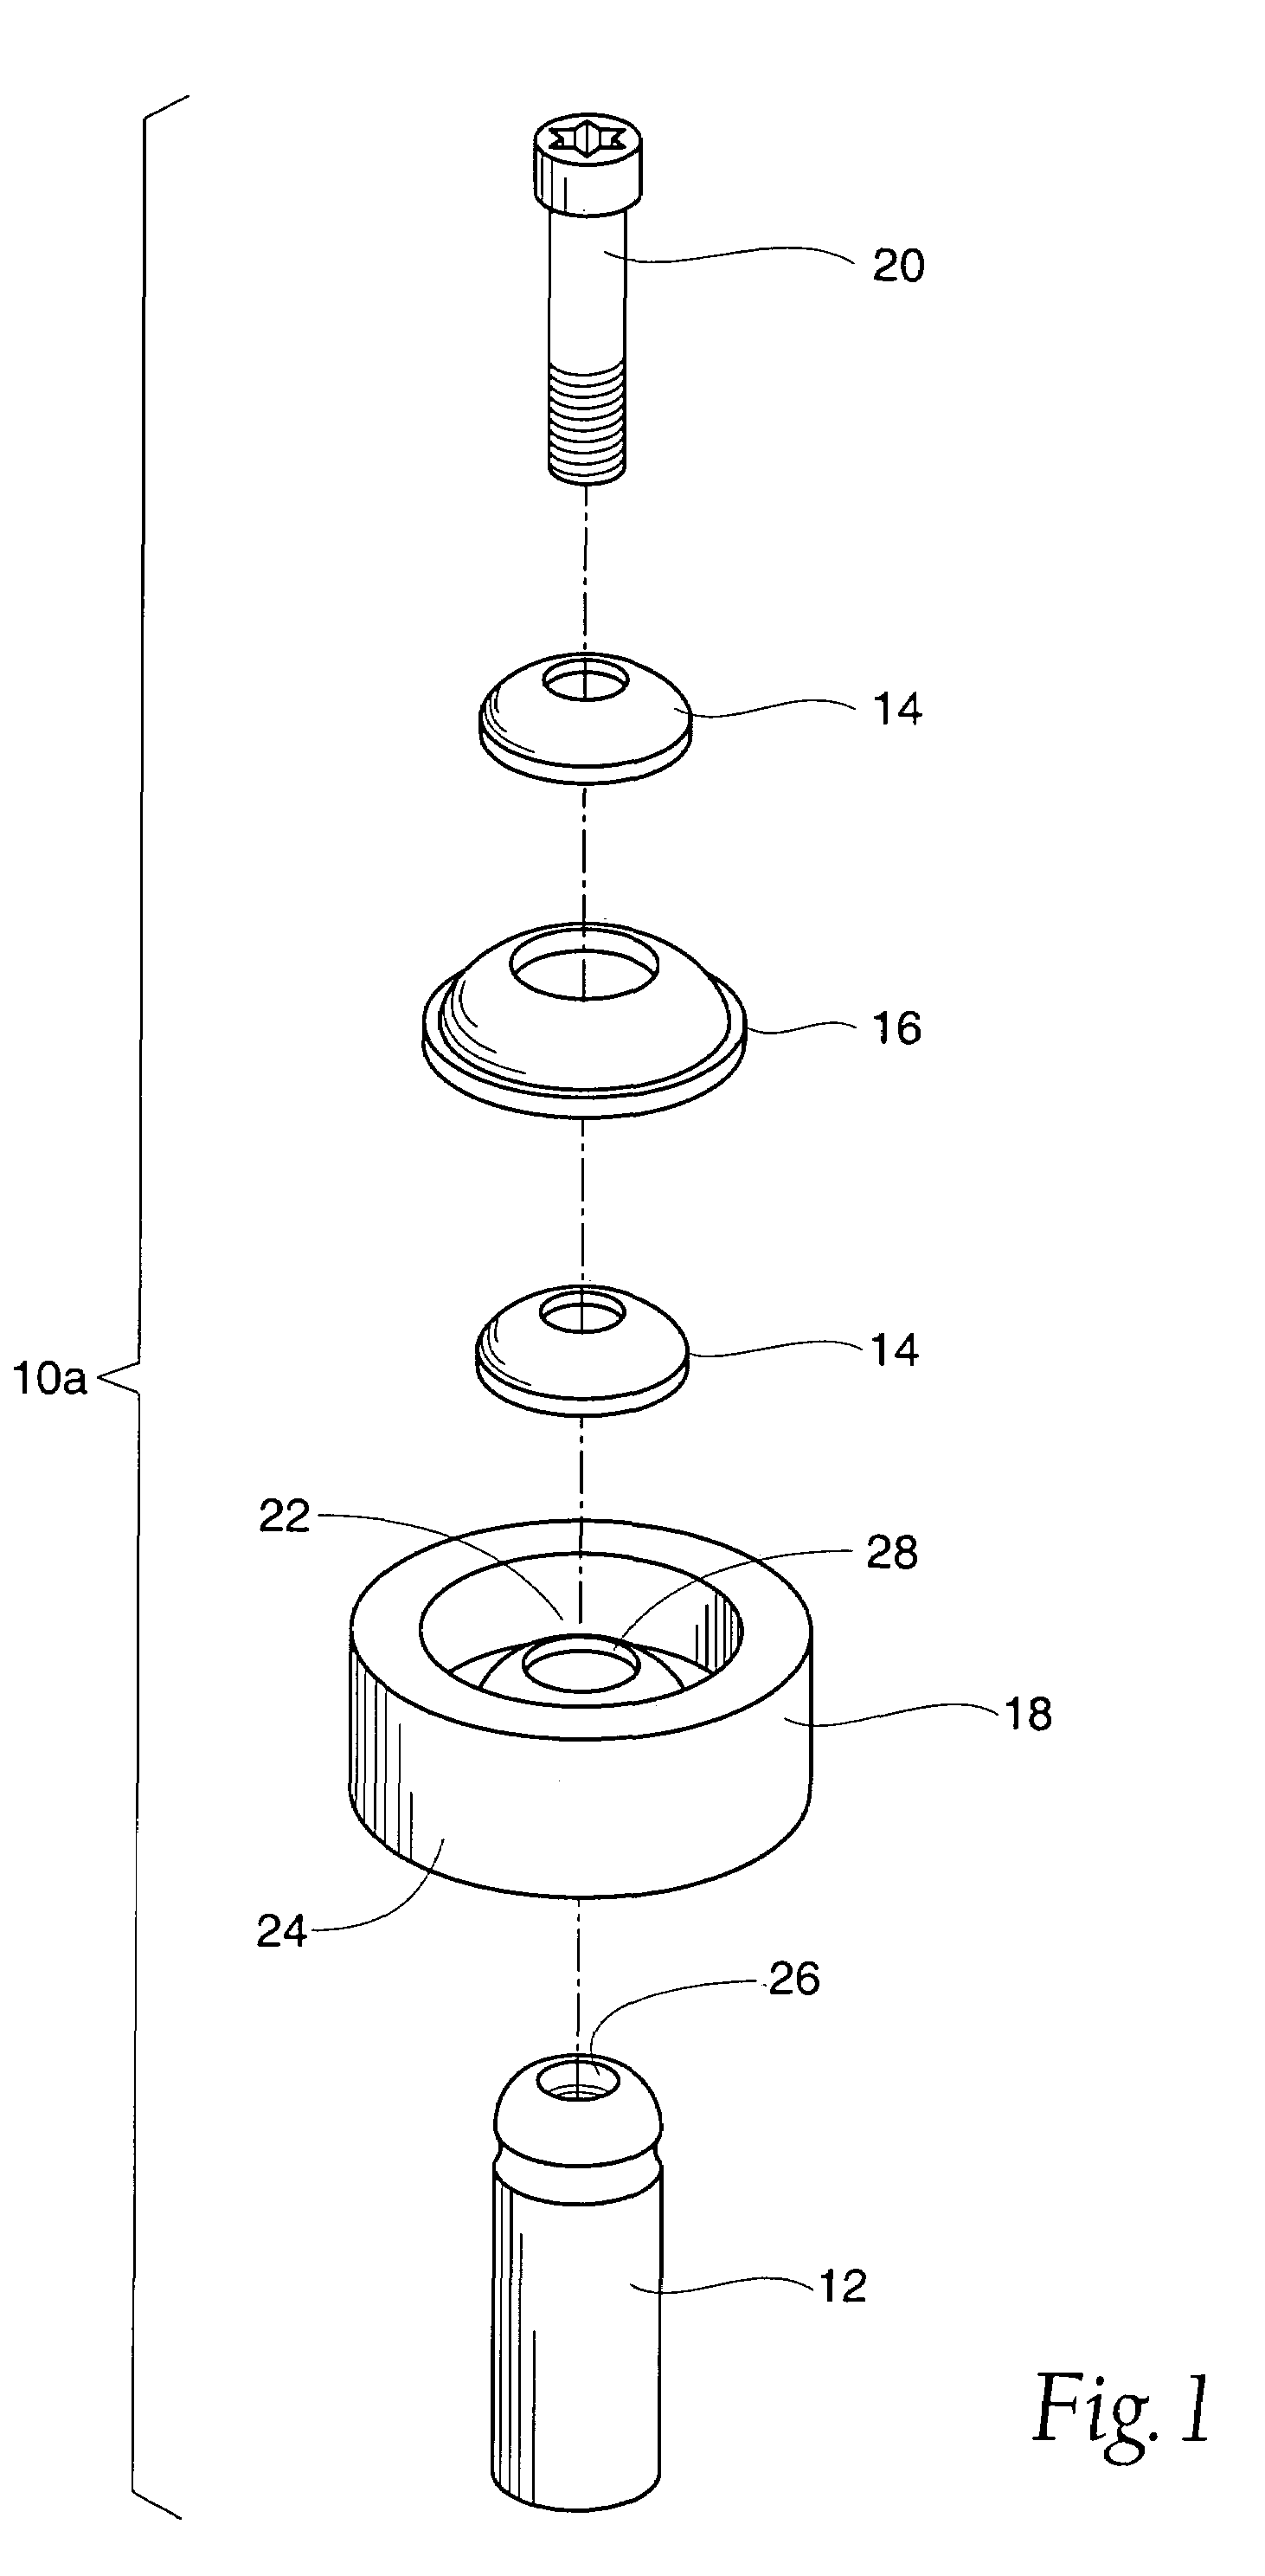 Adjustable bone prostheses and related methods